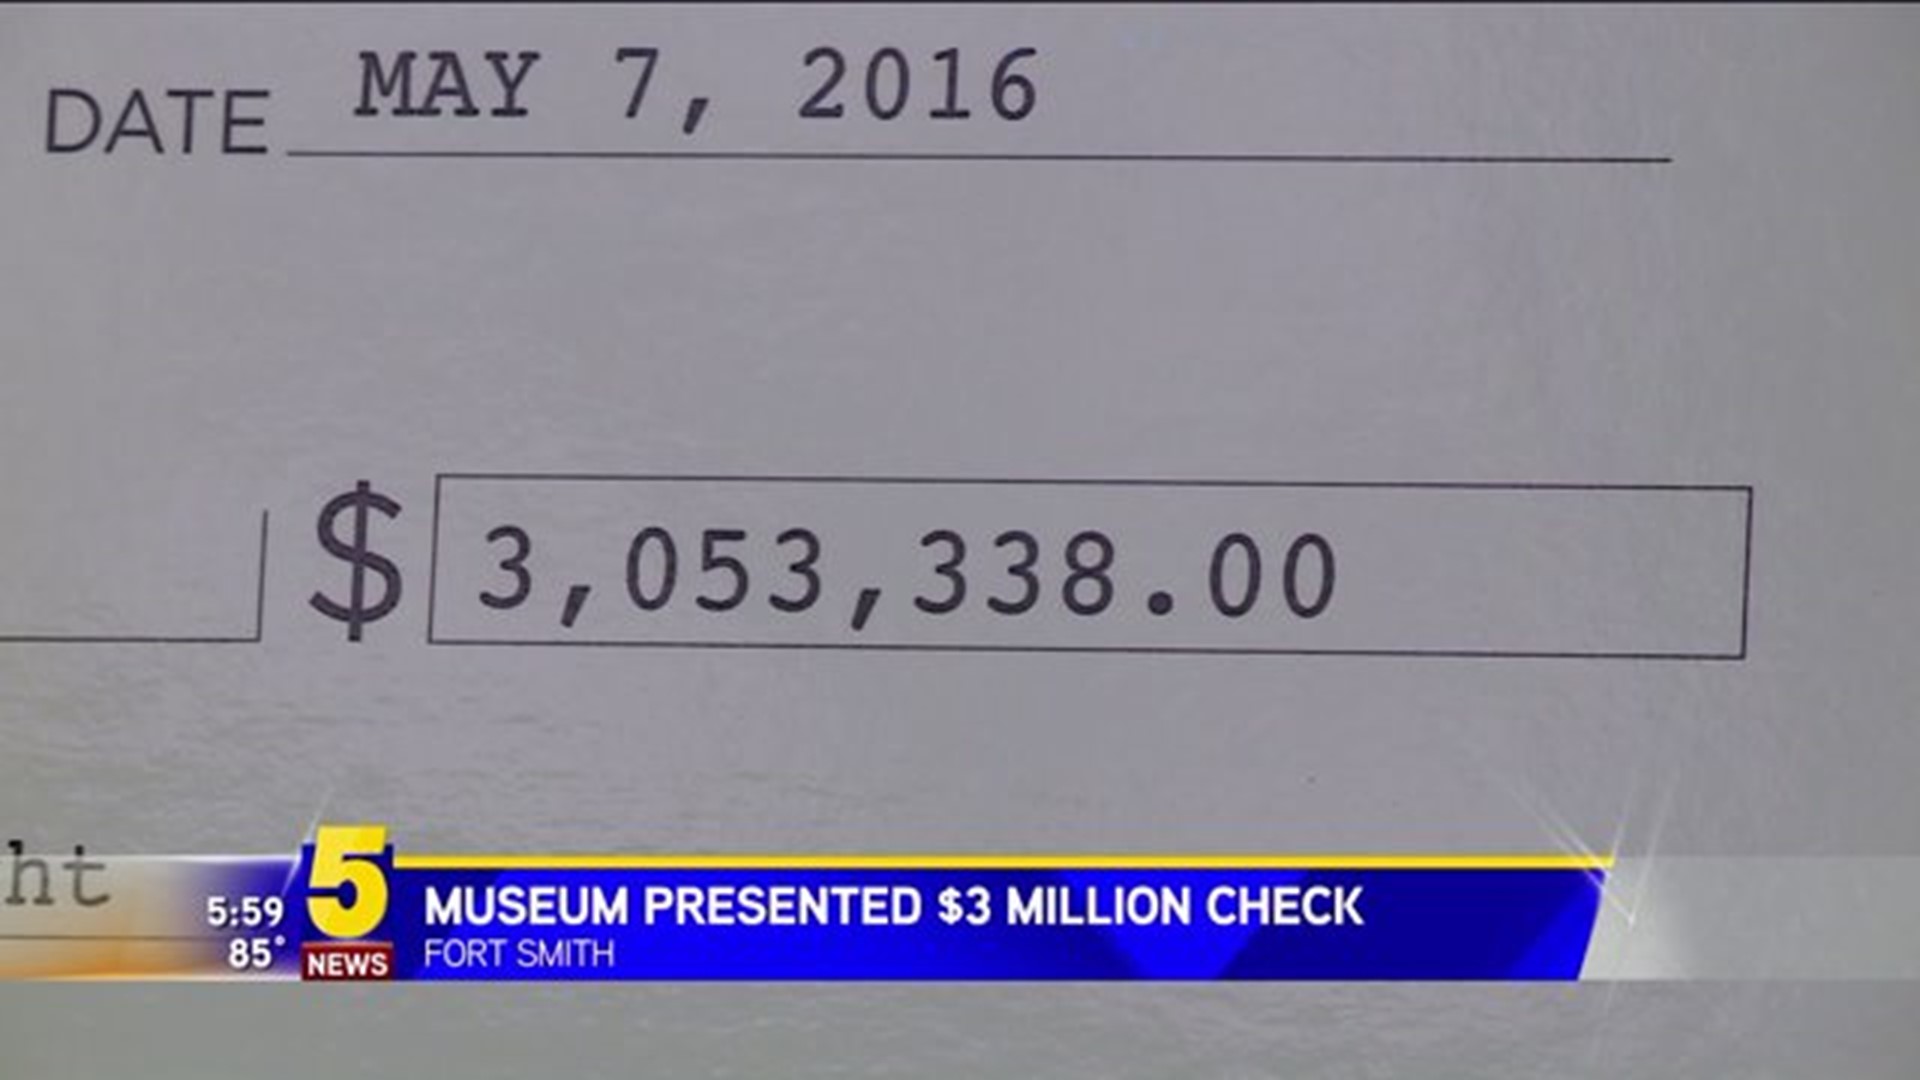 US Marshals Museum Presented Check